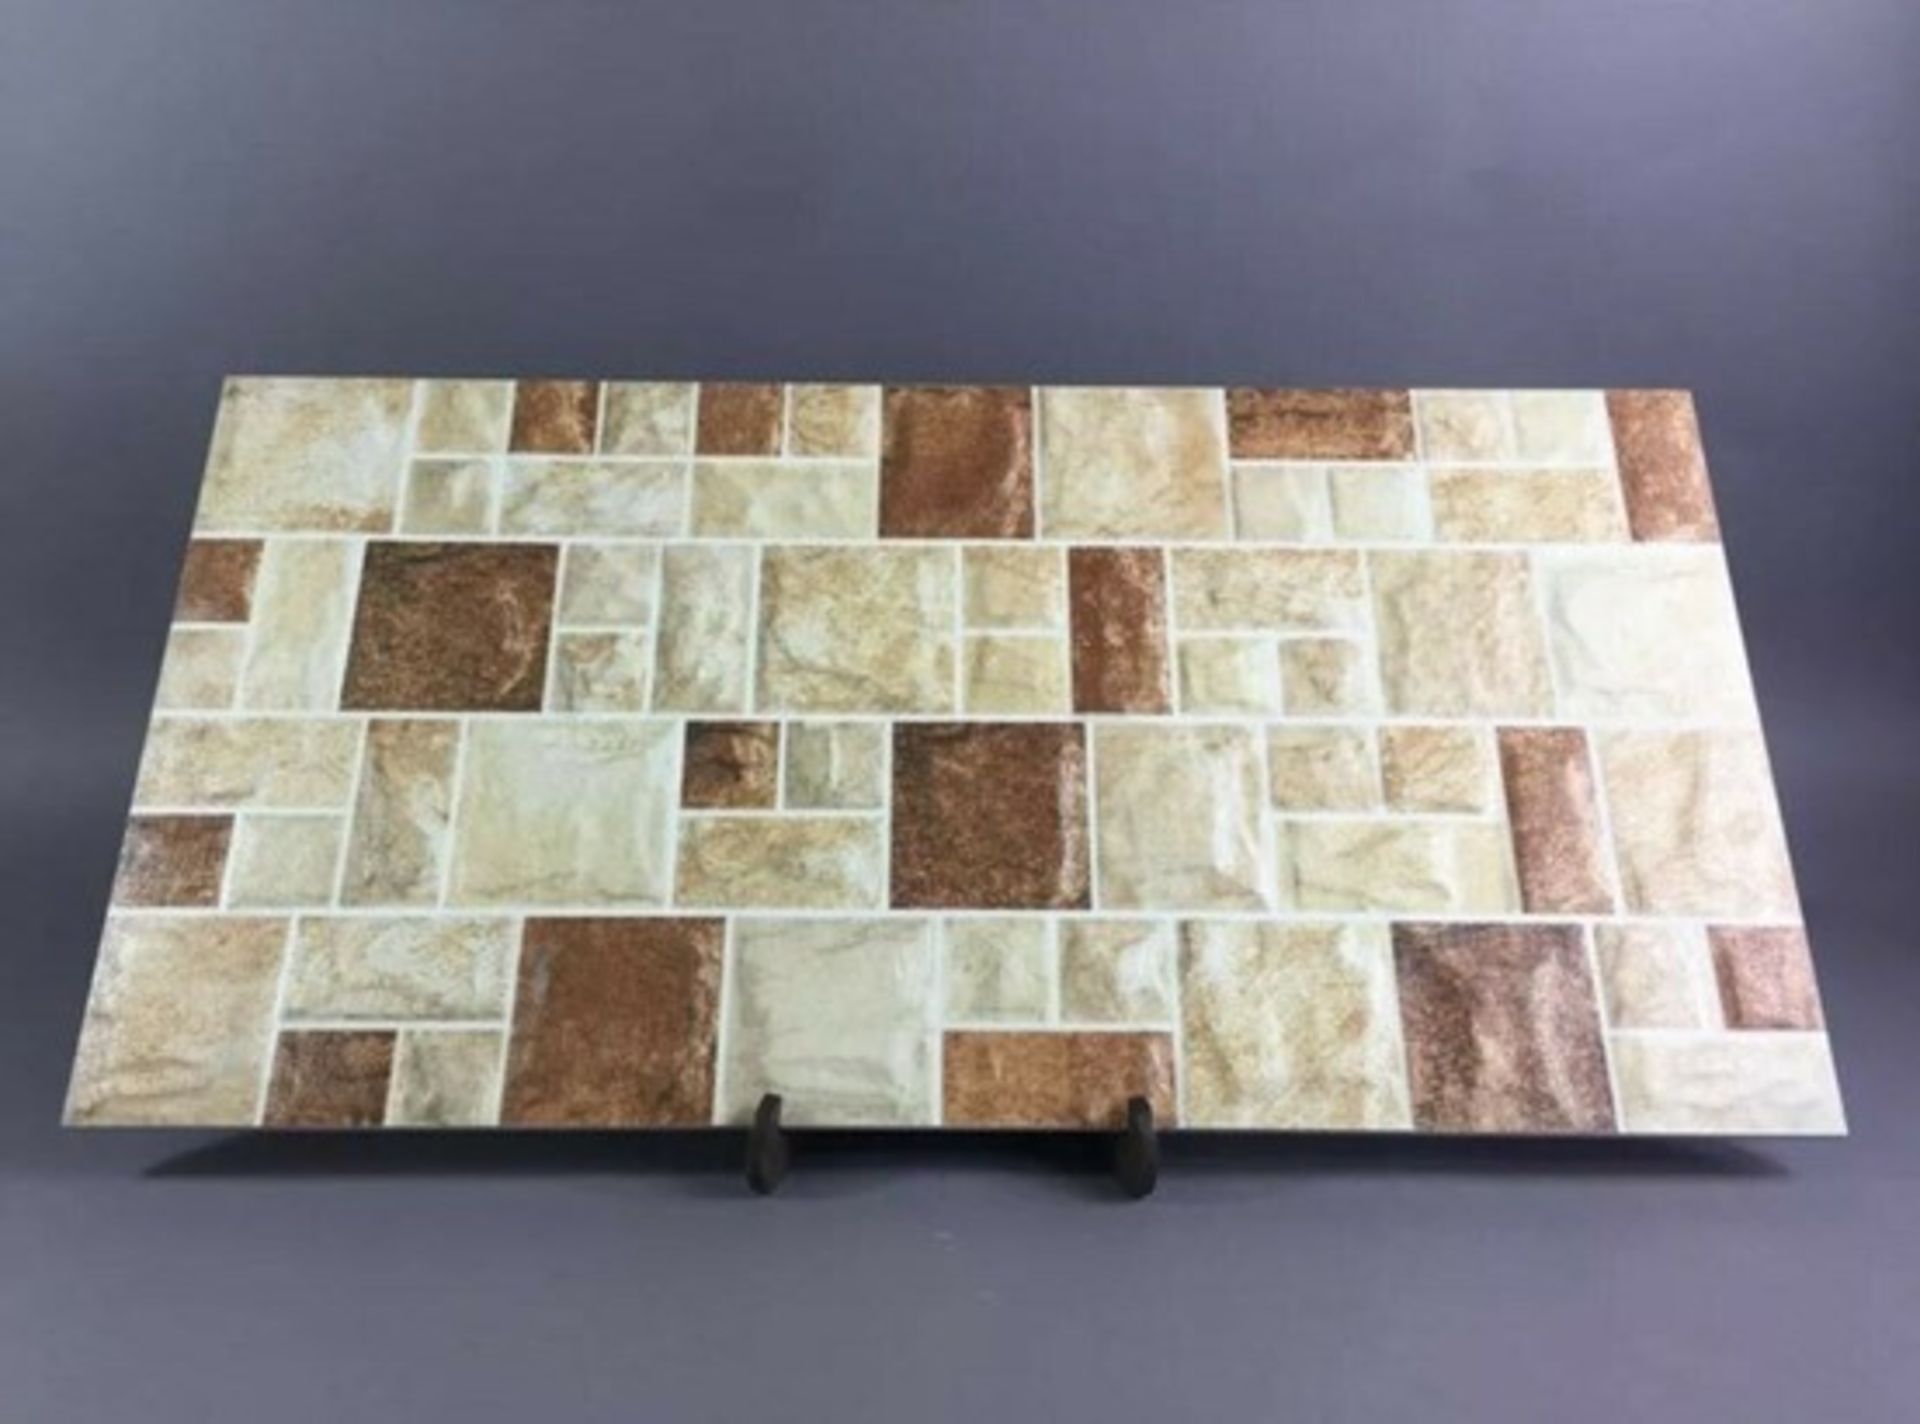 360 sheets of tiles - Stock Clearance High Quality Ceramic Wall/Floor Tiles 300*600*8mm, 64SQM total